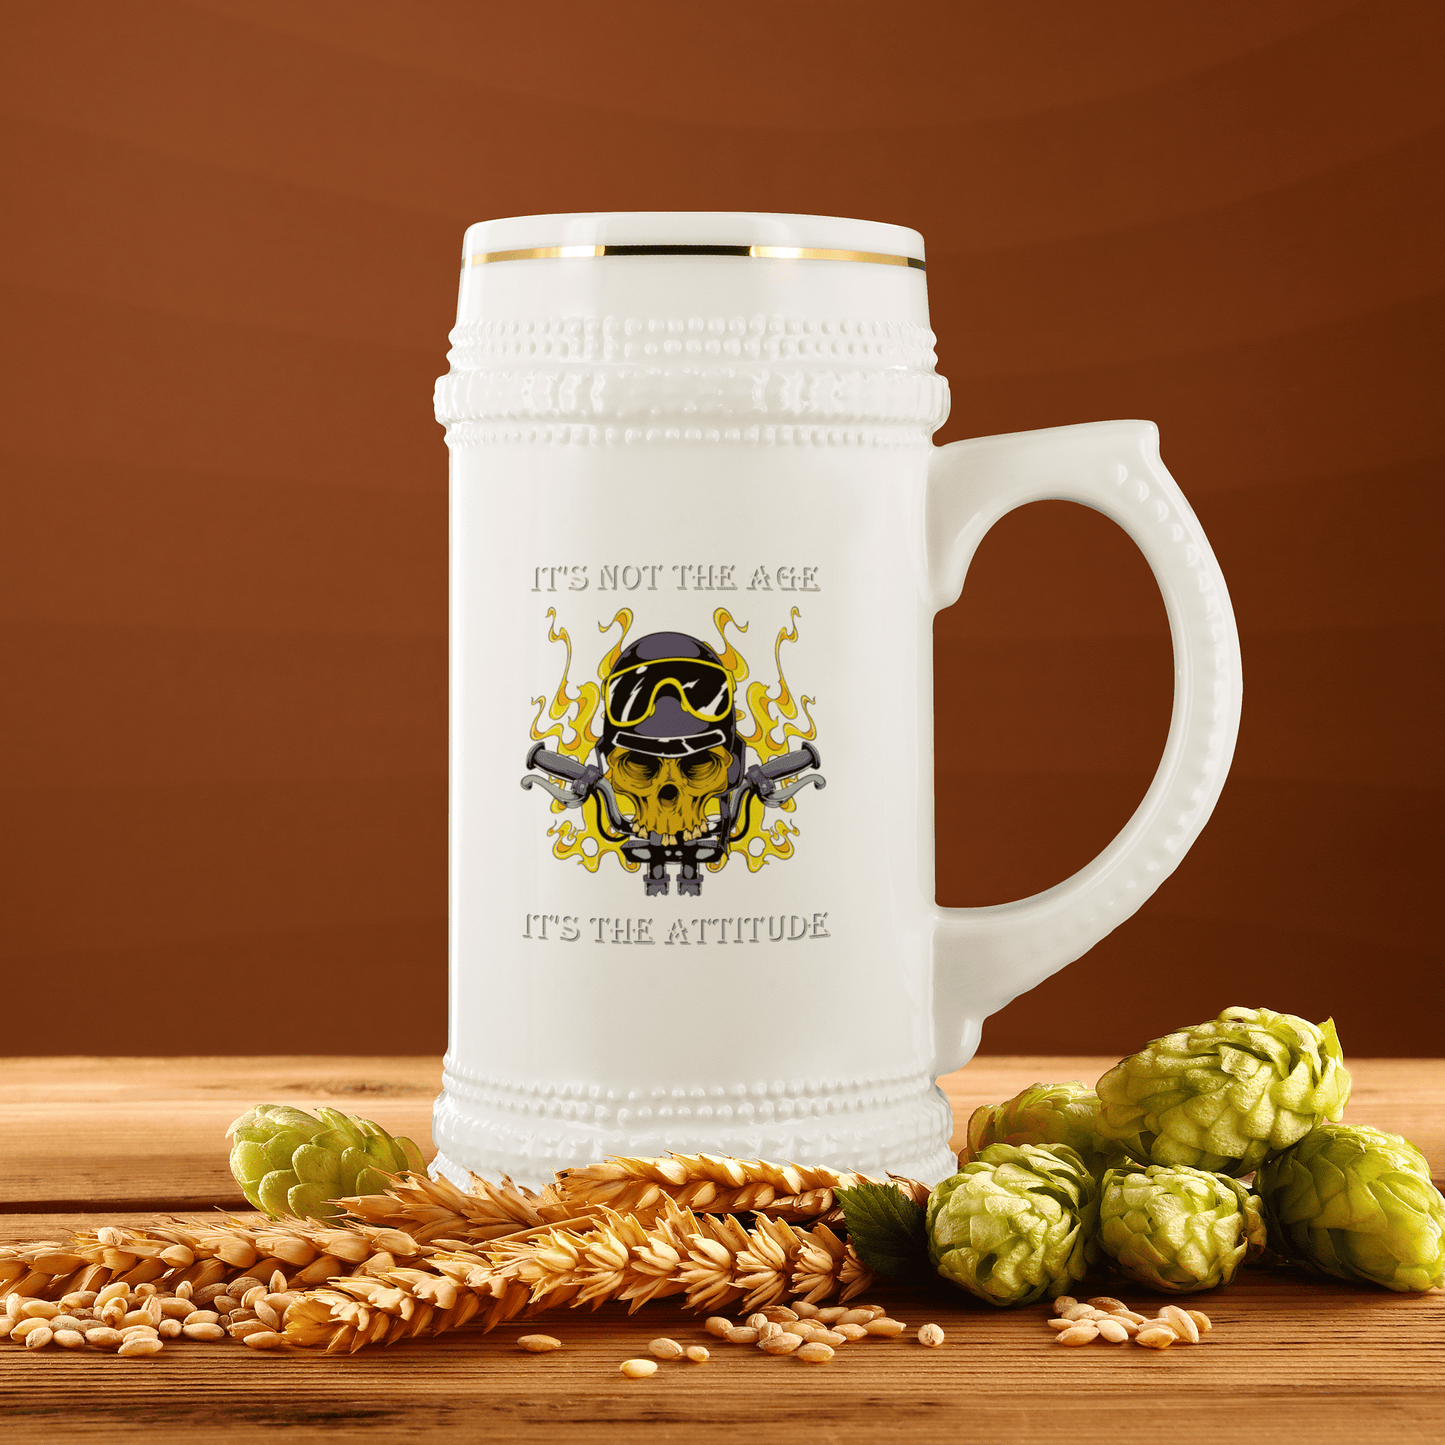 It's The Attitude - Beer Stein - Classically Styled